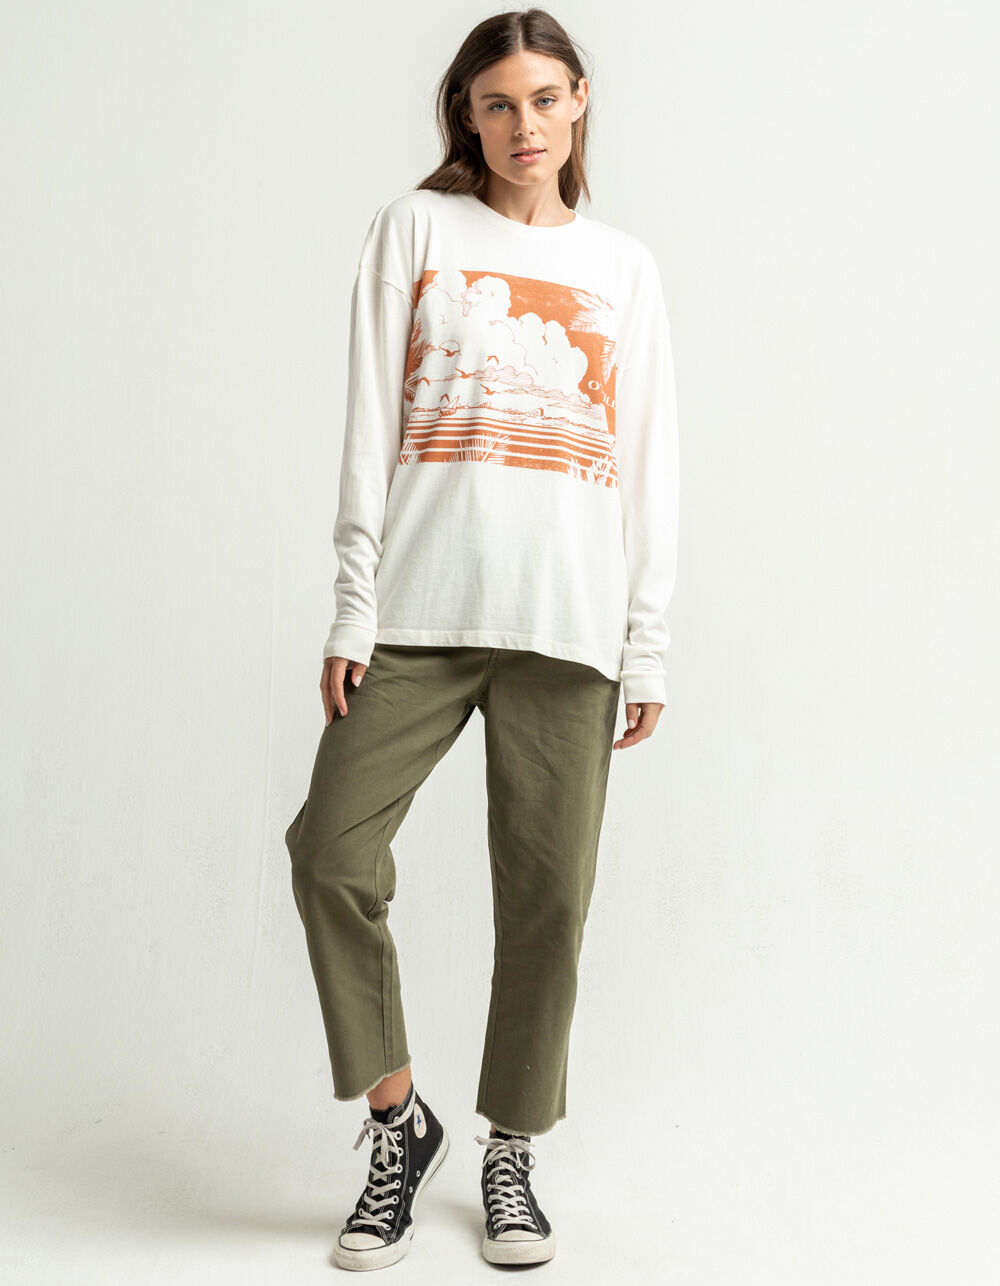 O'NEILL Lost Coast Pigment Womens Tee - OFWHT | Tillys